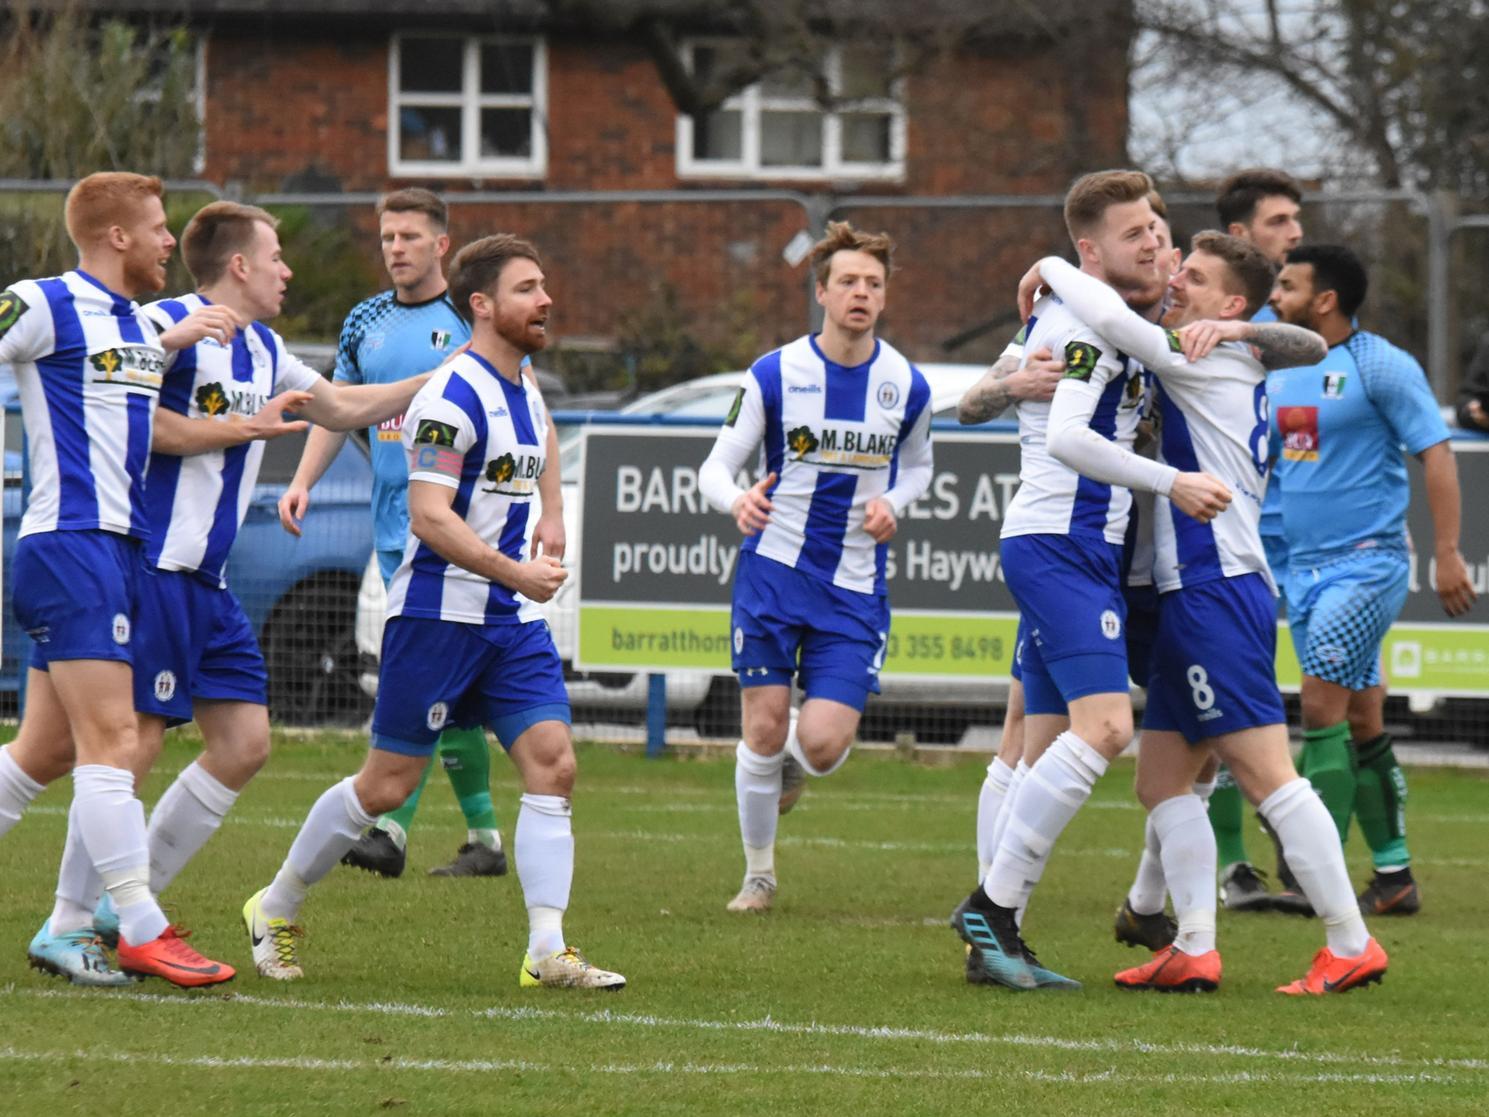 The team congratulate Josh Spinks on his goal.